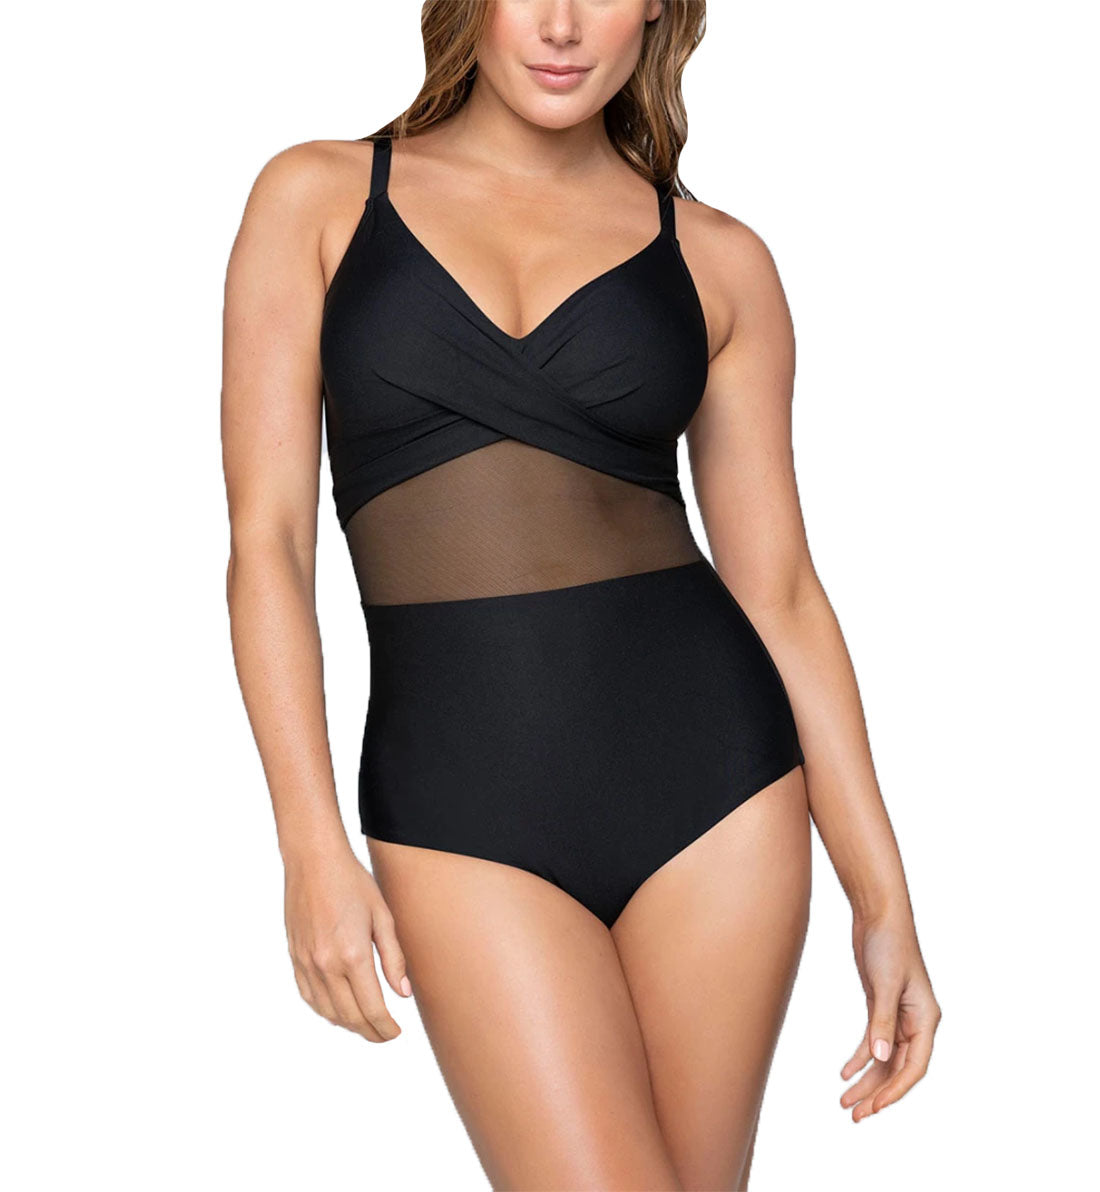 Leonisa Sheer Details Cross Front One Piece Shaping Swimsuit (190858B),Small,Black_locbs - Black,Small